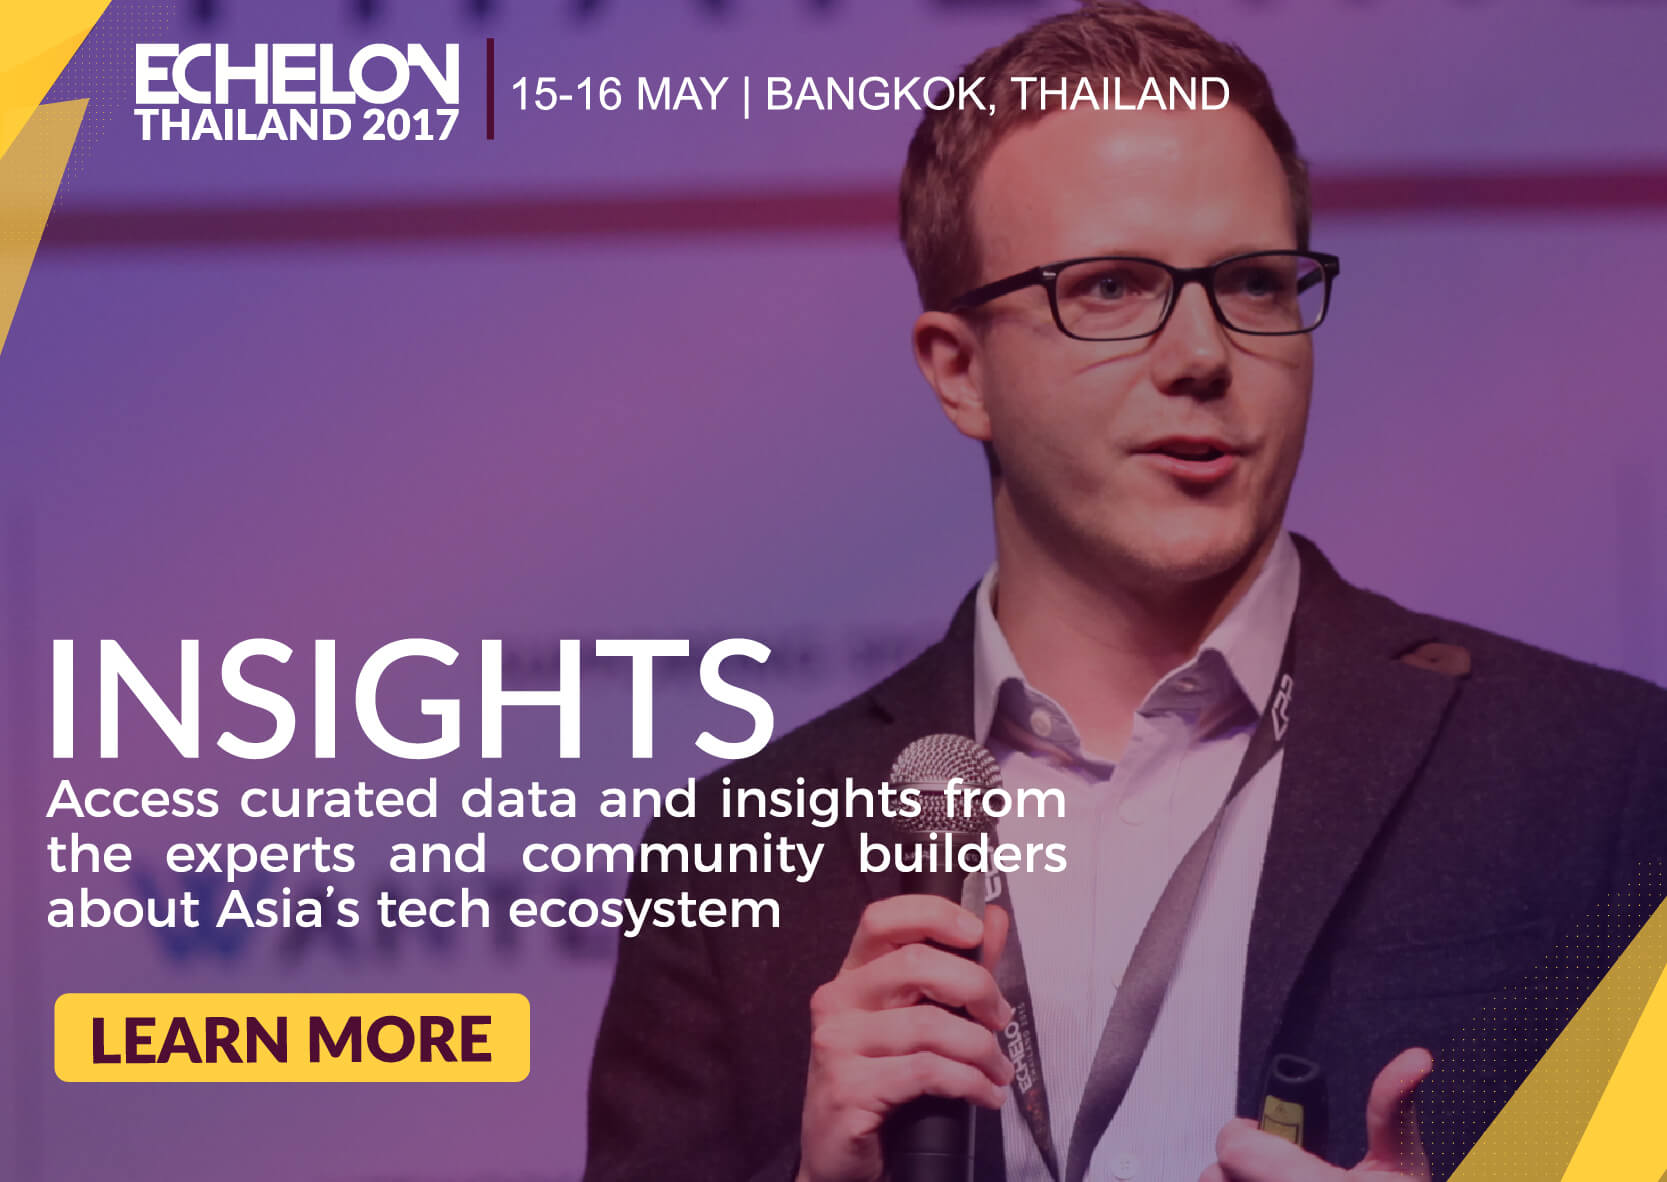 inarticle_echelon_thailand_insights_landing_page How can Google be dangerous for your business? Ask Appsumo